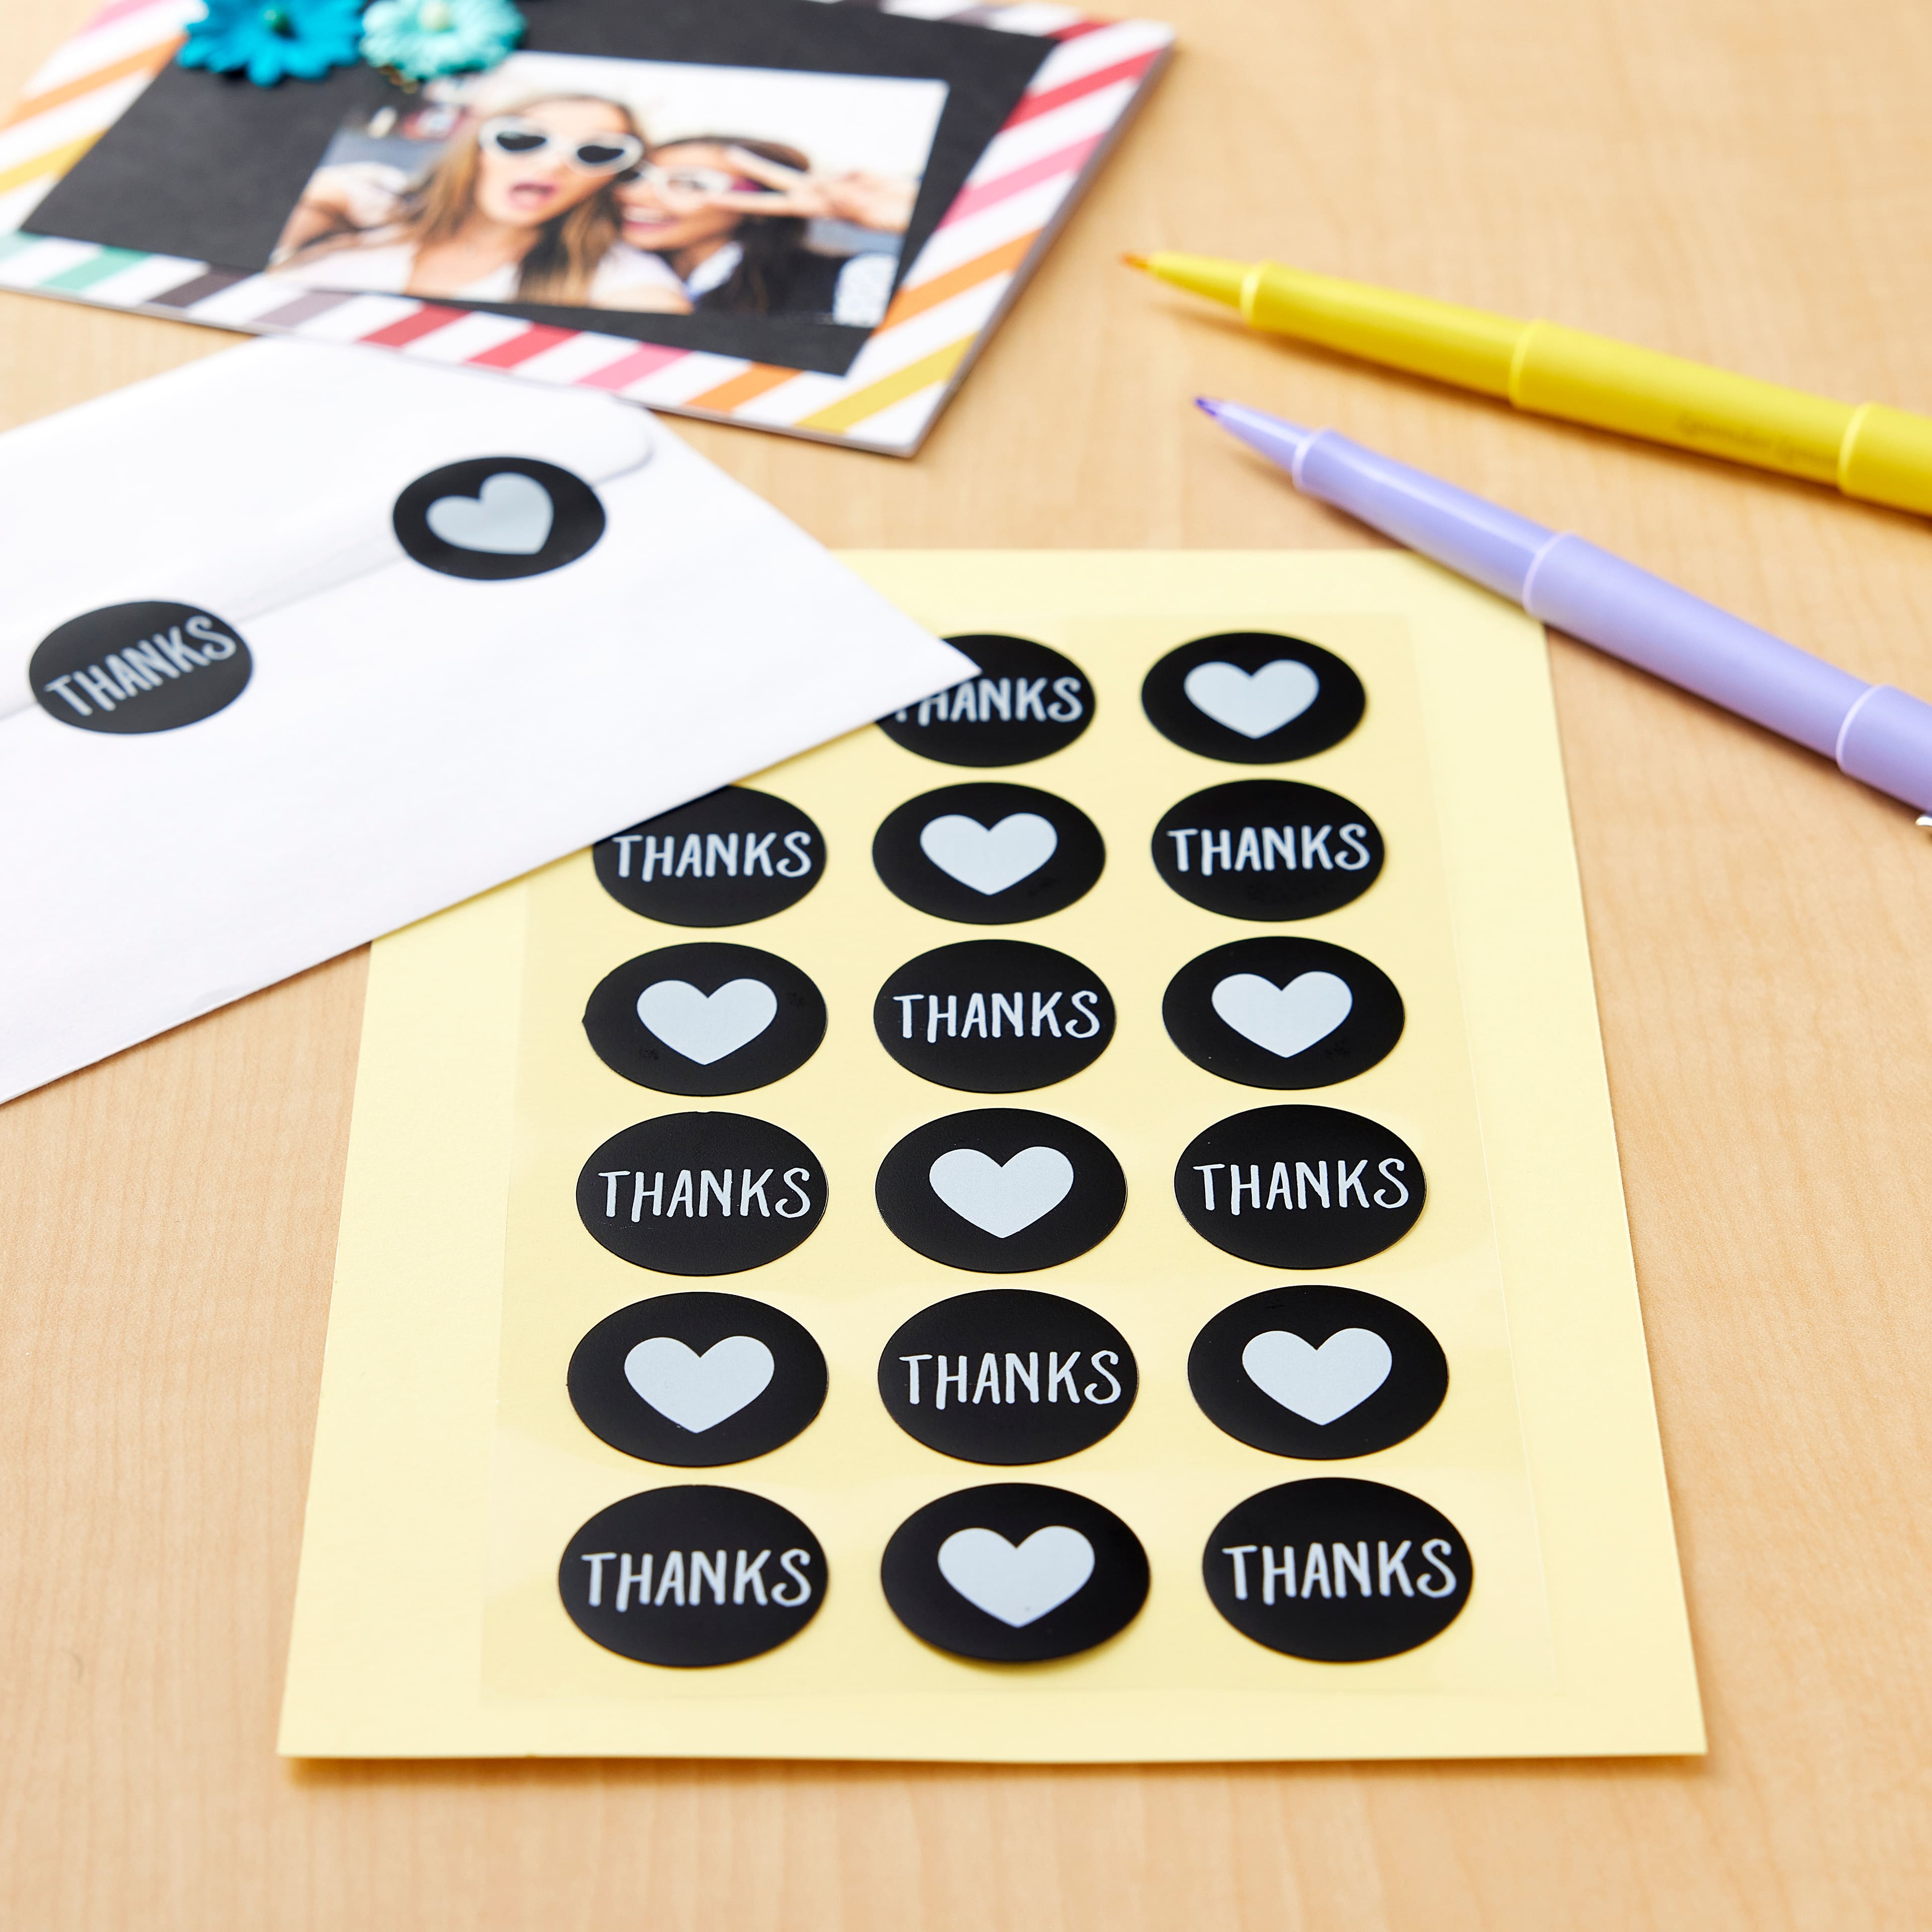 Thanks &#x26; Hearts Round Label Stickers by Recollections&#x2122;